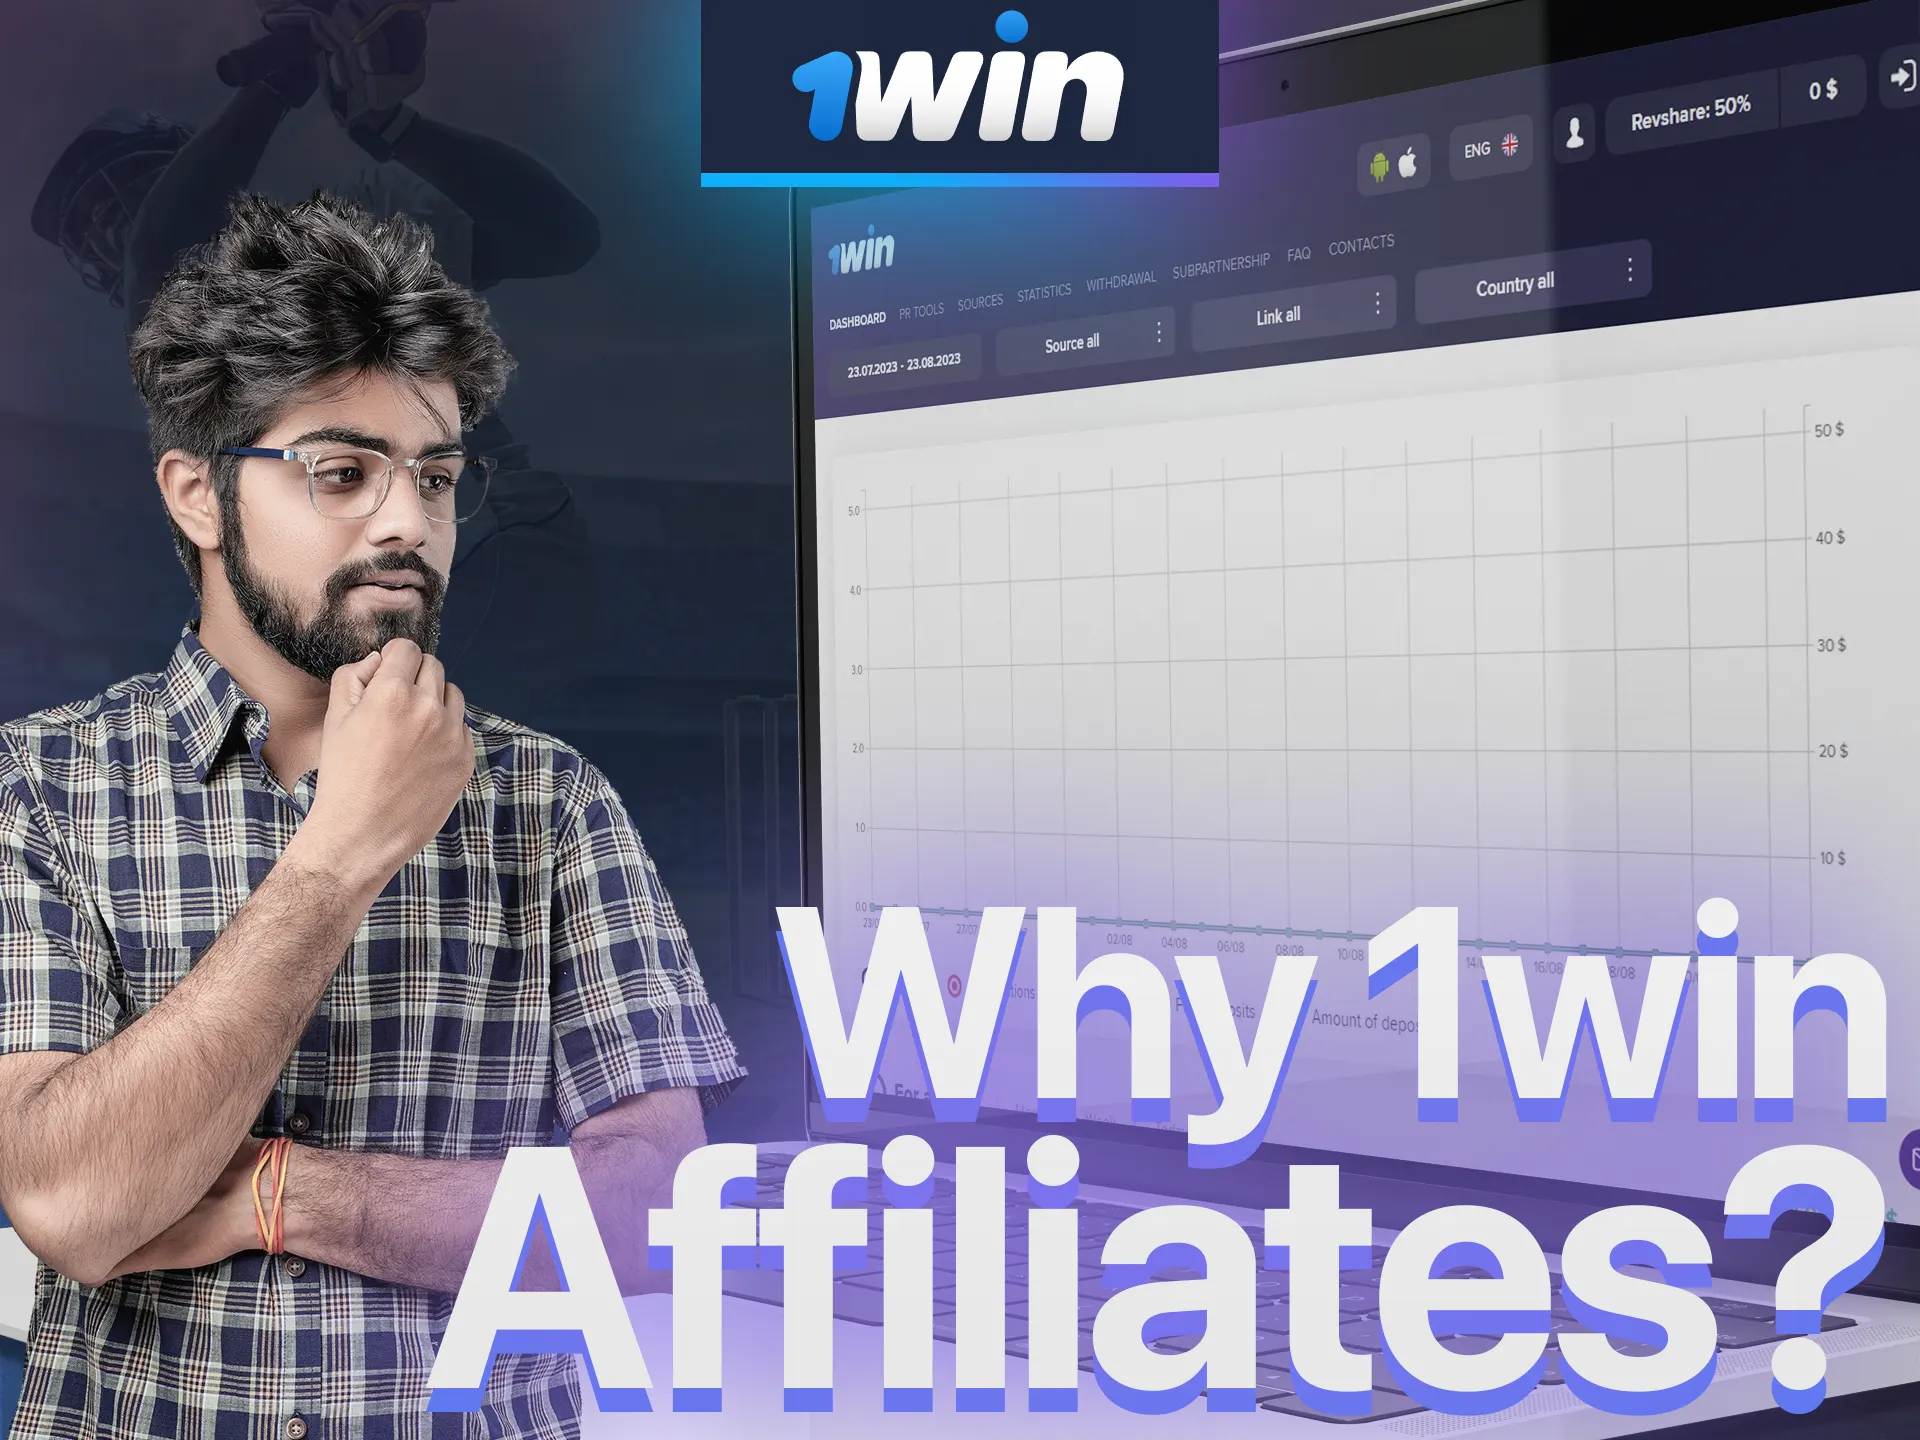 Find out the reasons why you should choose the 1Win affiliate program.